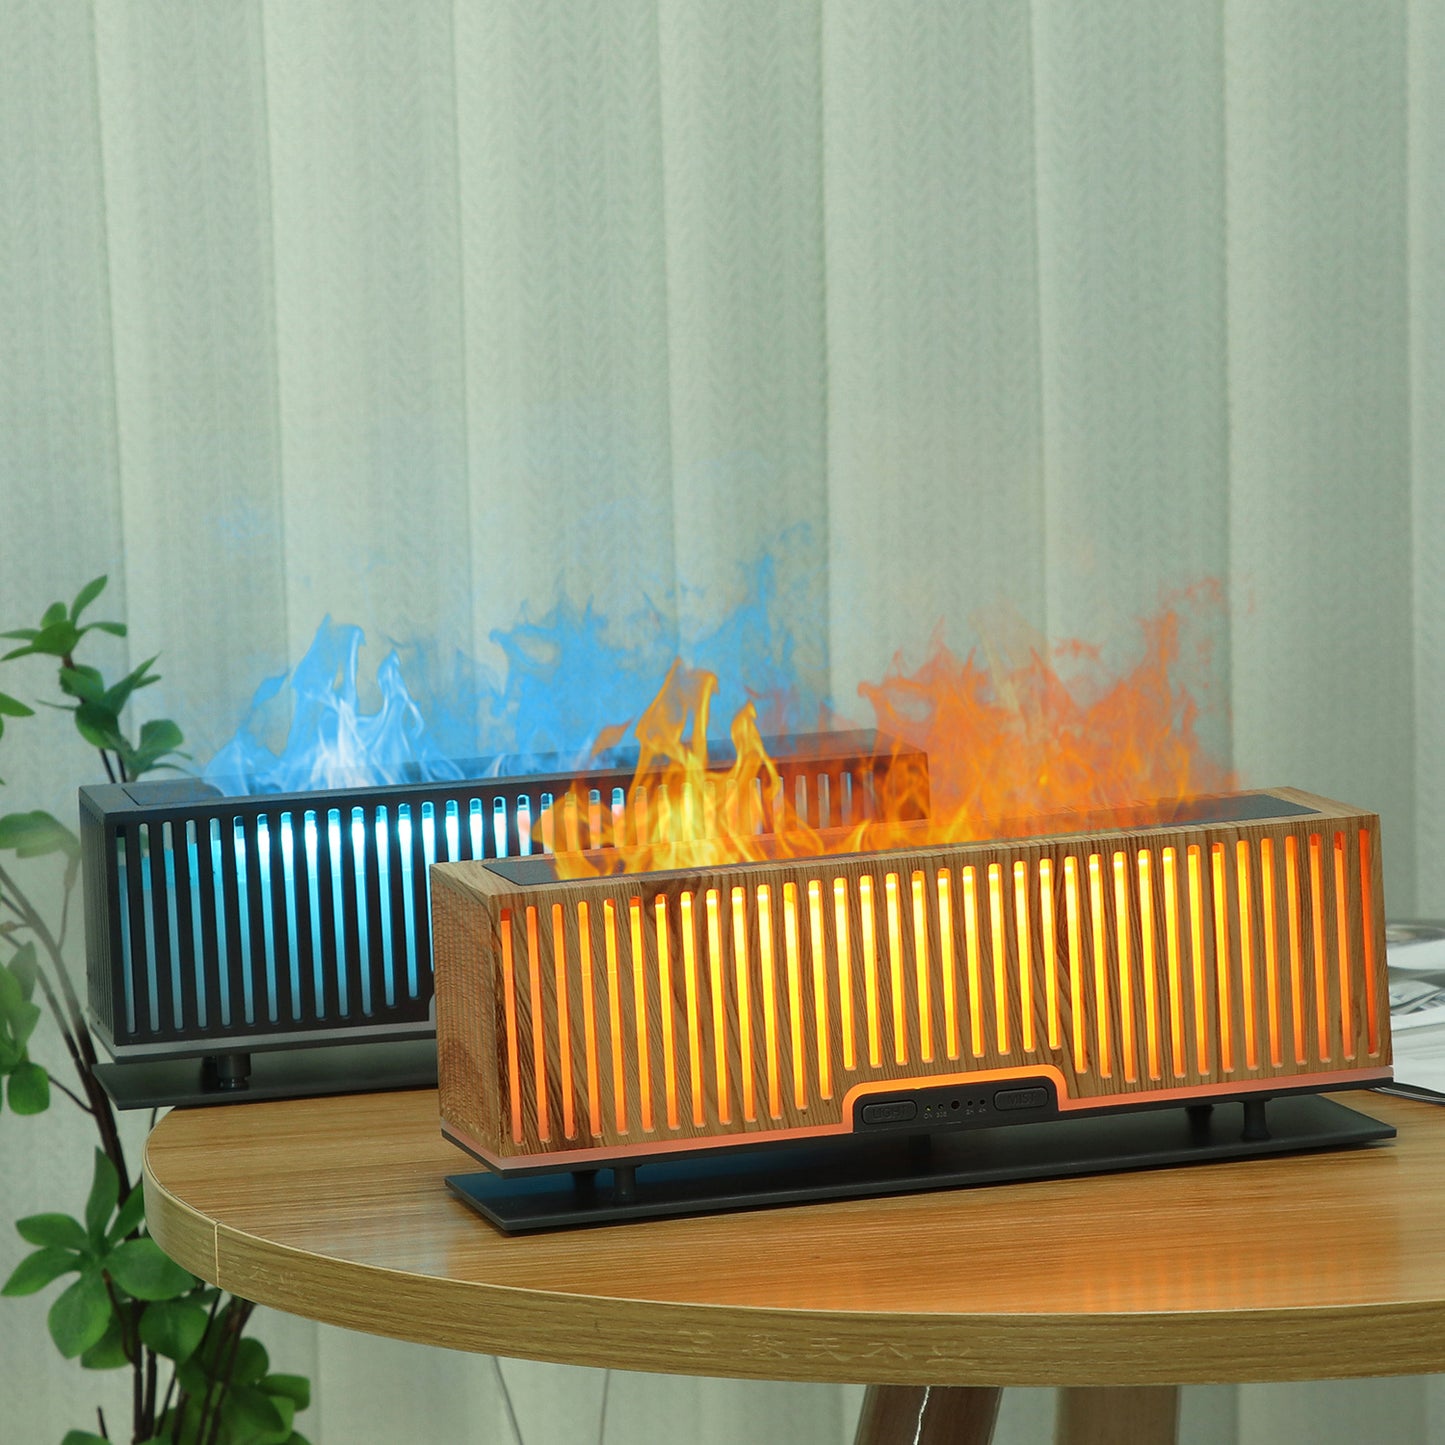 200ml flame diffuser grid vertical strip hollow humidifier atomizer bedroom atmosphere light humidifier